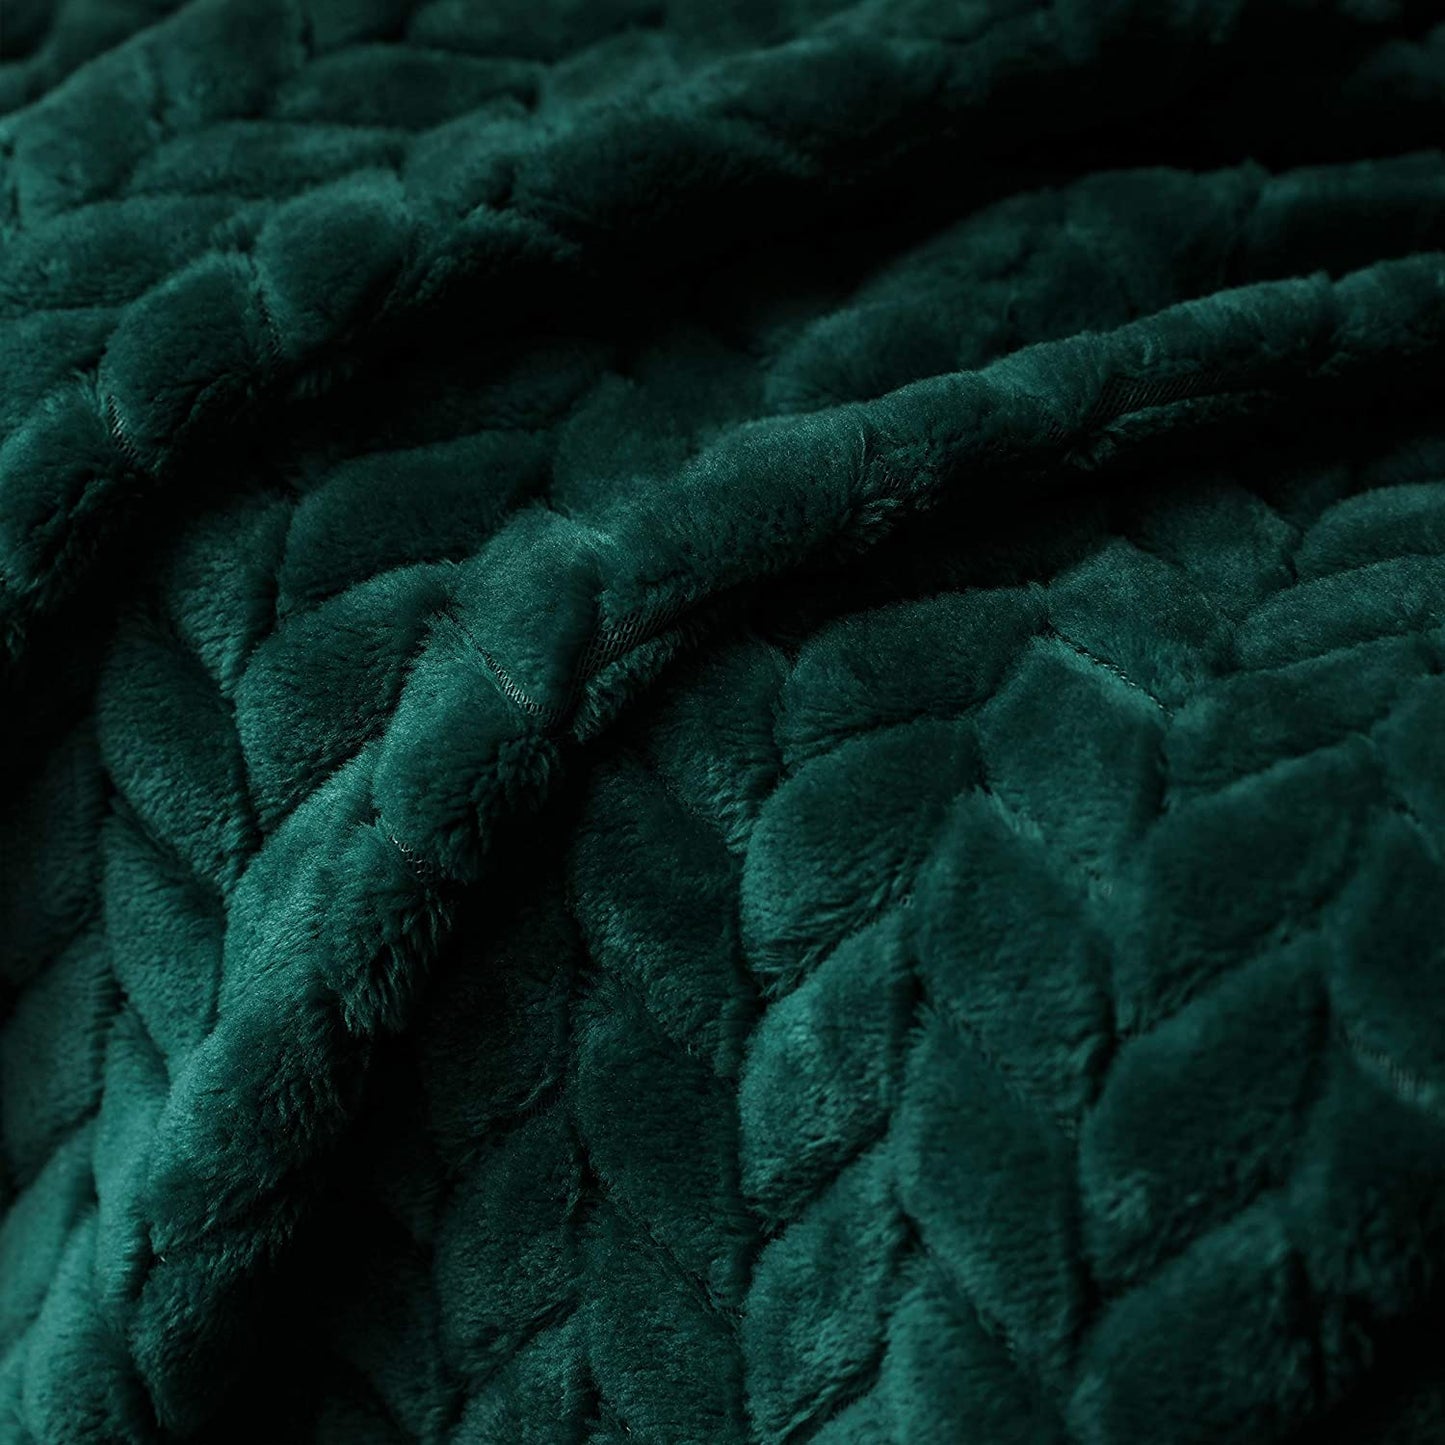 Exclusivo Mezcla Large Flannel Fleece Throw Blanket, Jacquard Weave Leaves Pattern (50" x 70", Forest Green) - Soft, Warm, Lightweight and Decorative